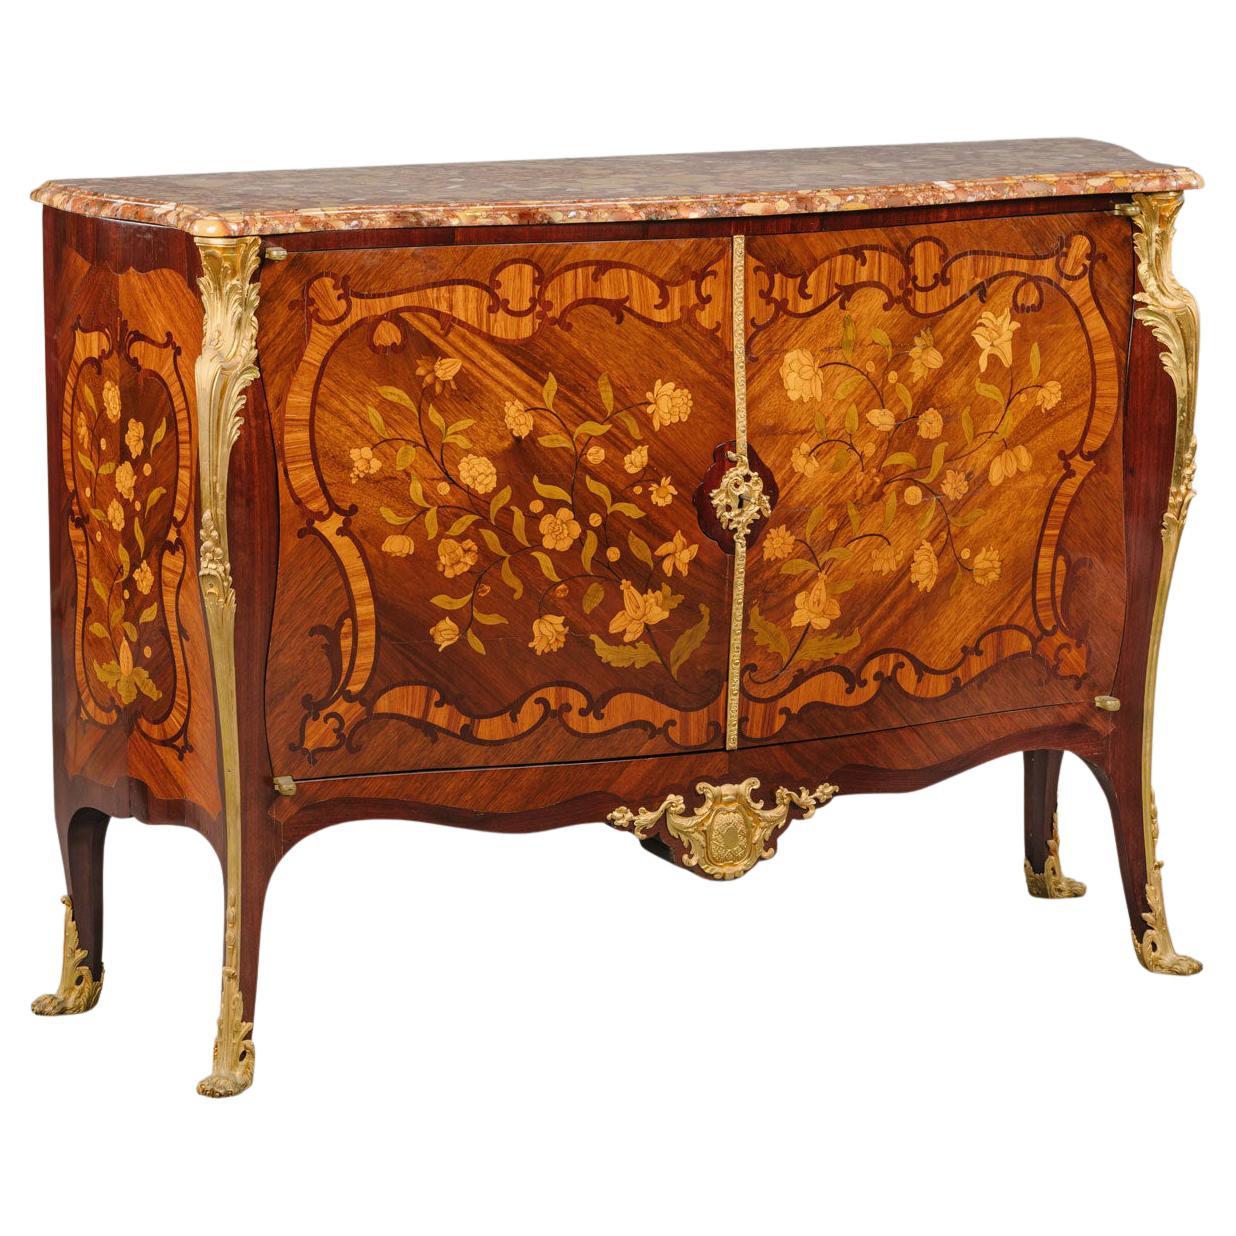 Fine Louis XV Style Gilt-Bronze Mounted Marquetry Inlaid Commode